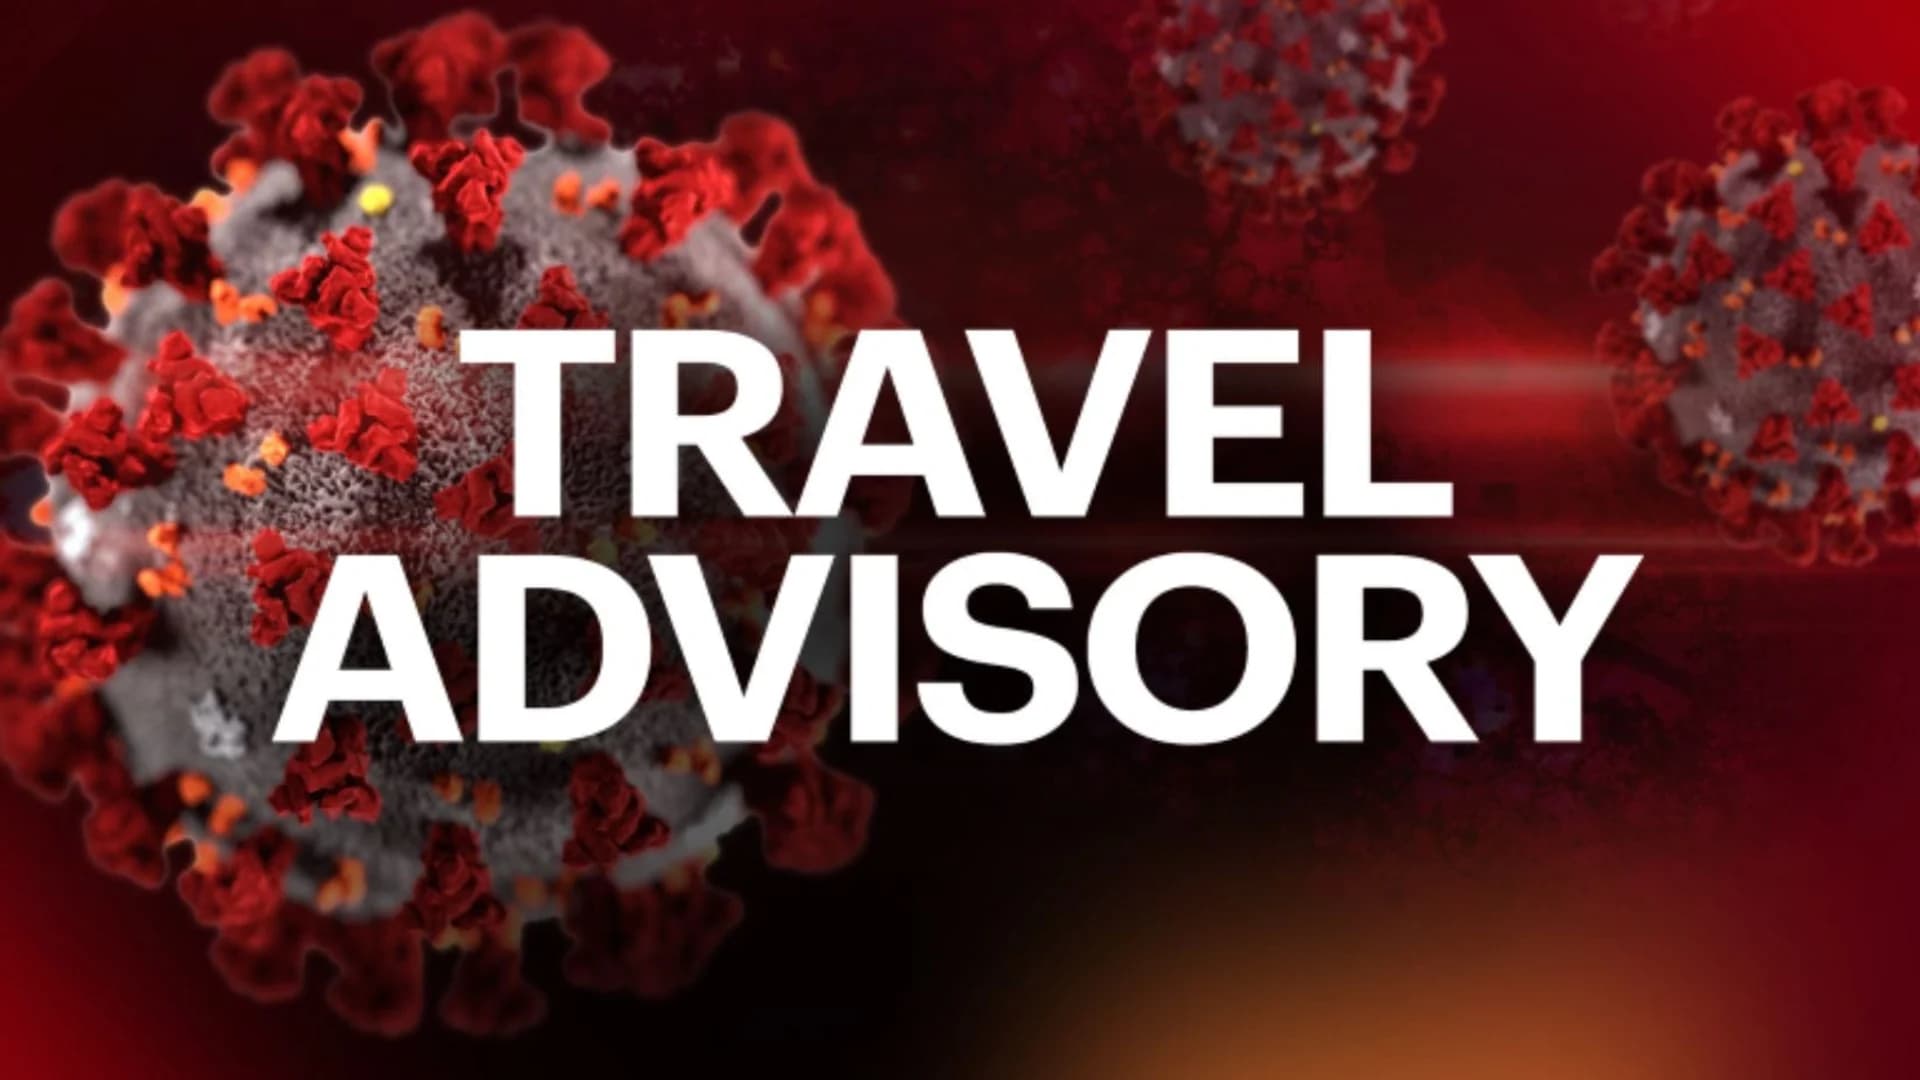 Gov. Murphy: 5 states removed from NJ's COVID-19 travel advisory